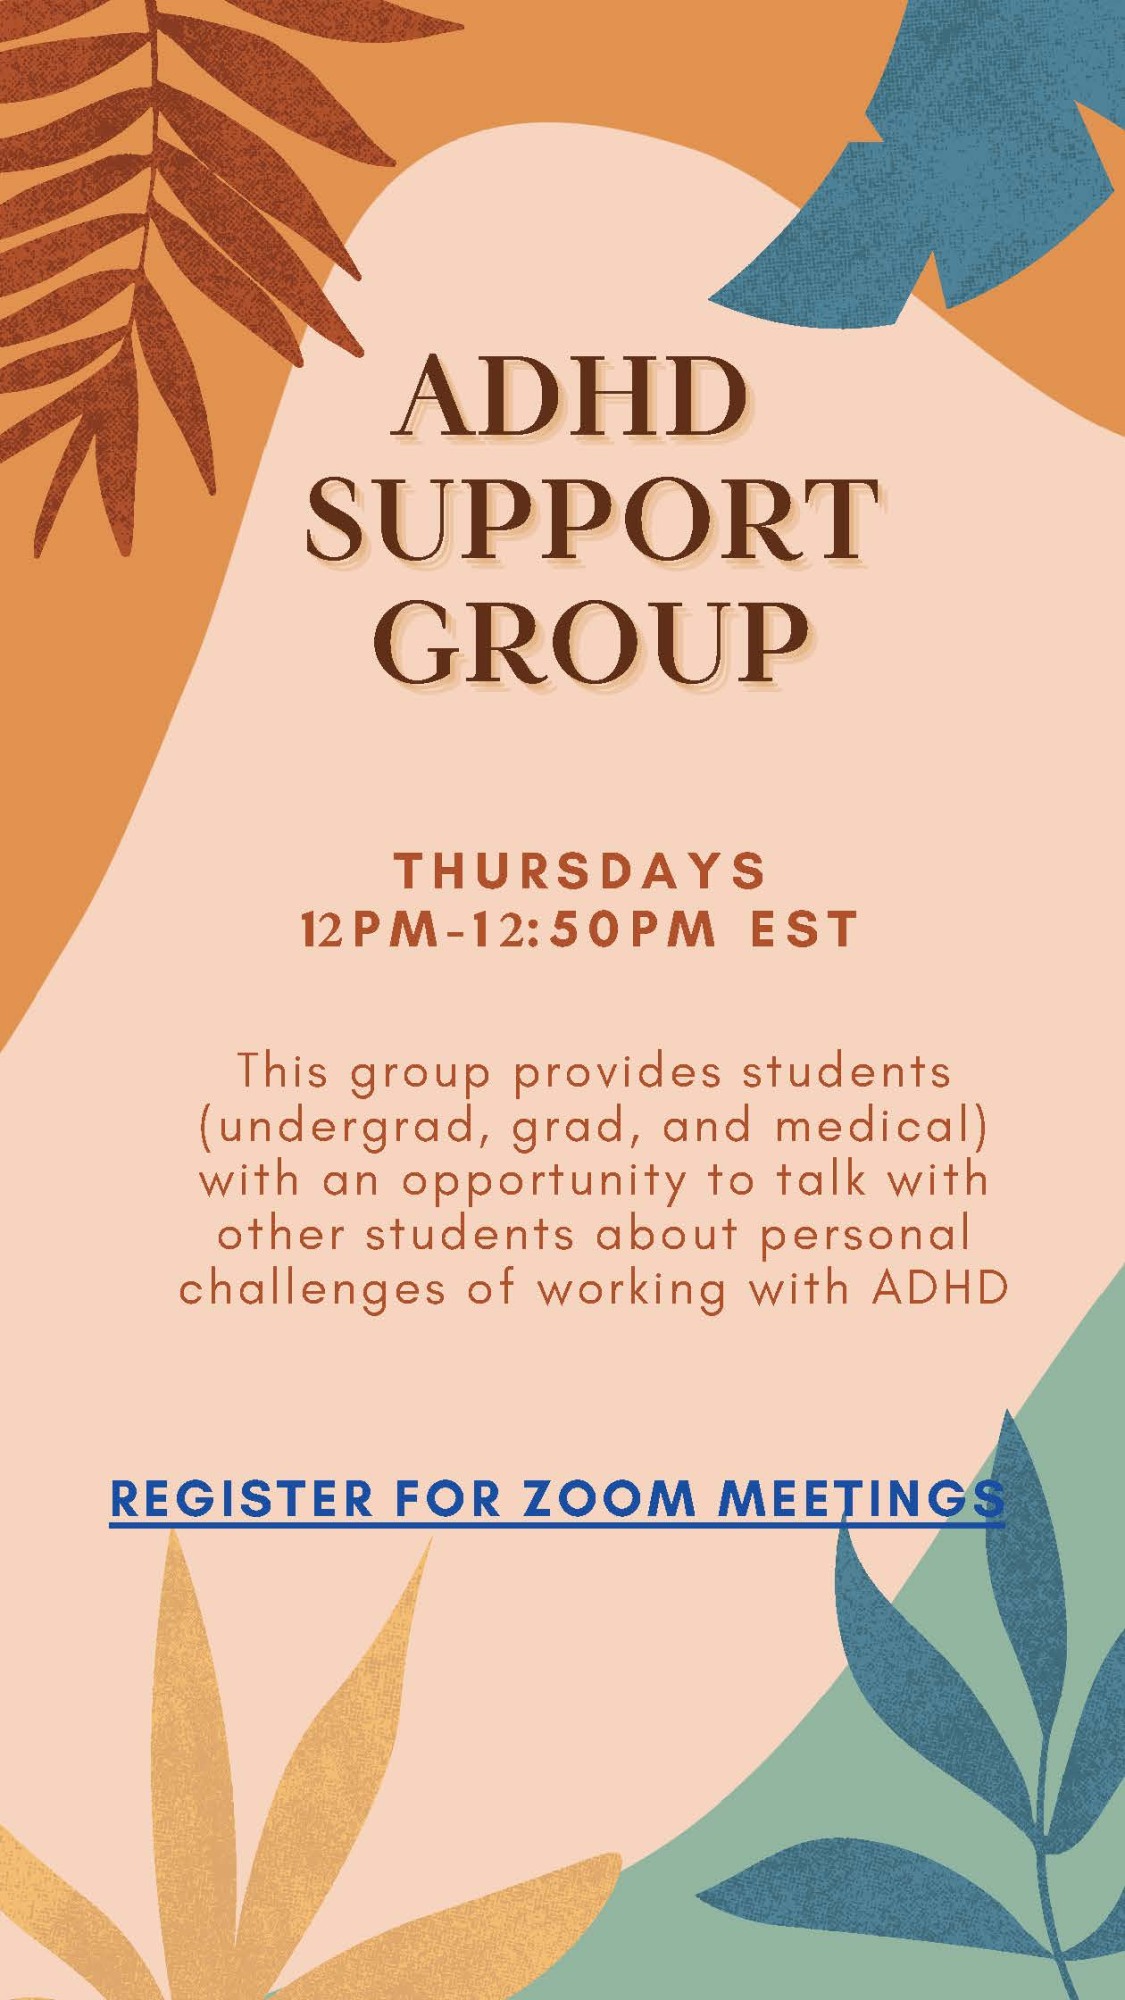 ADHD support group flyer for spring 2024, warm colors and leaf design, includes a QR code and link to register